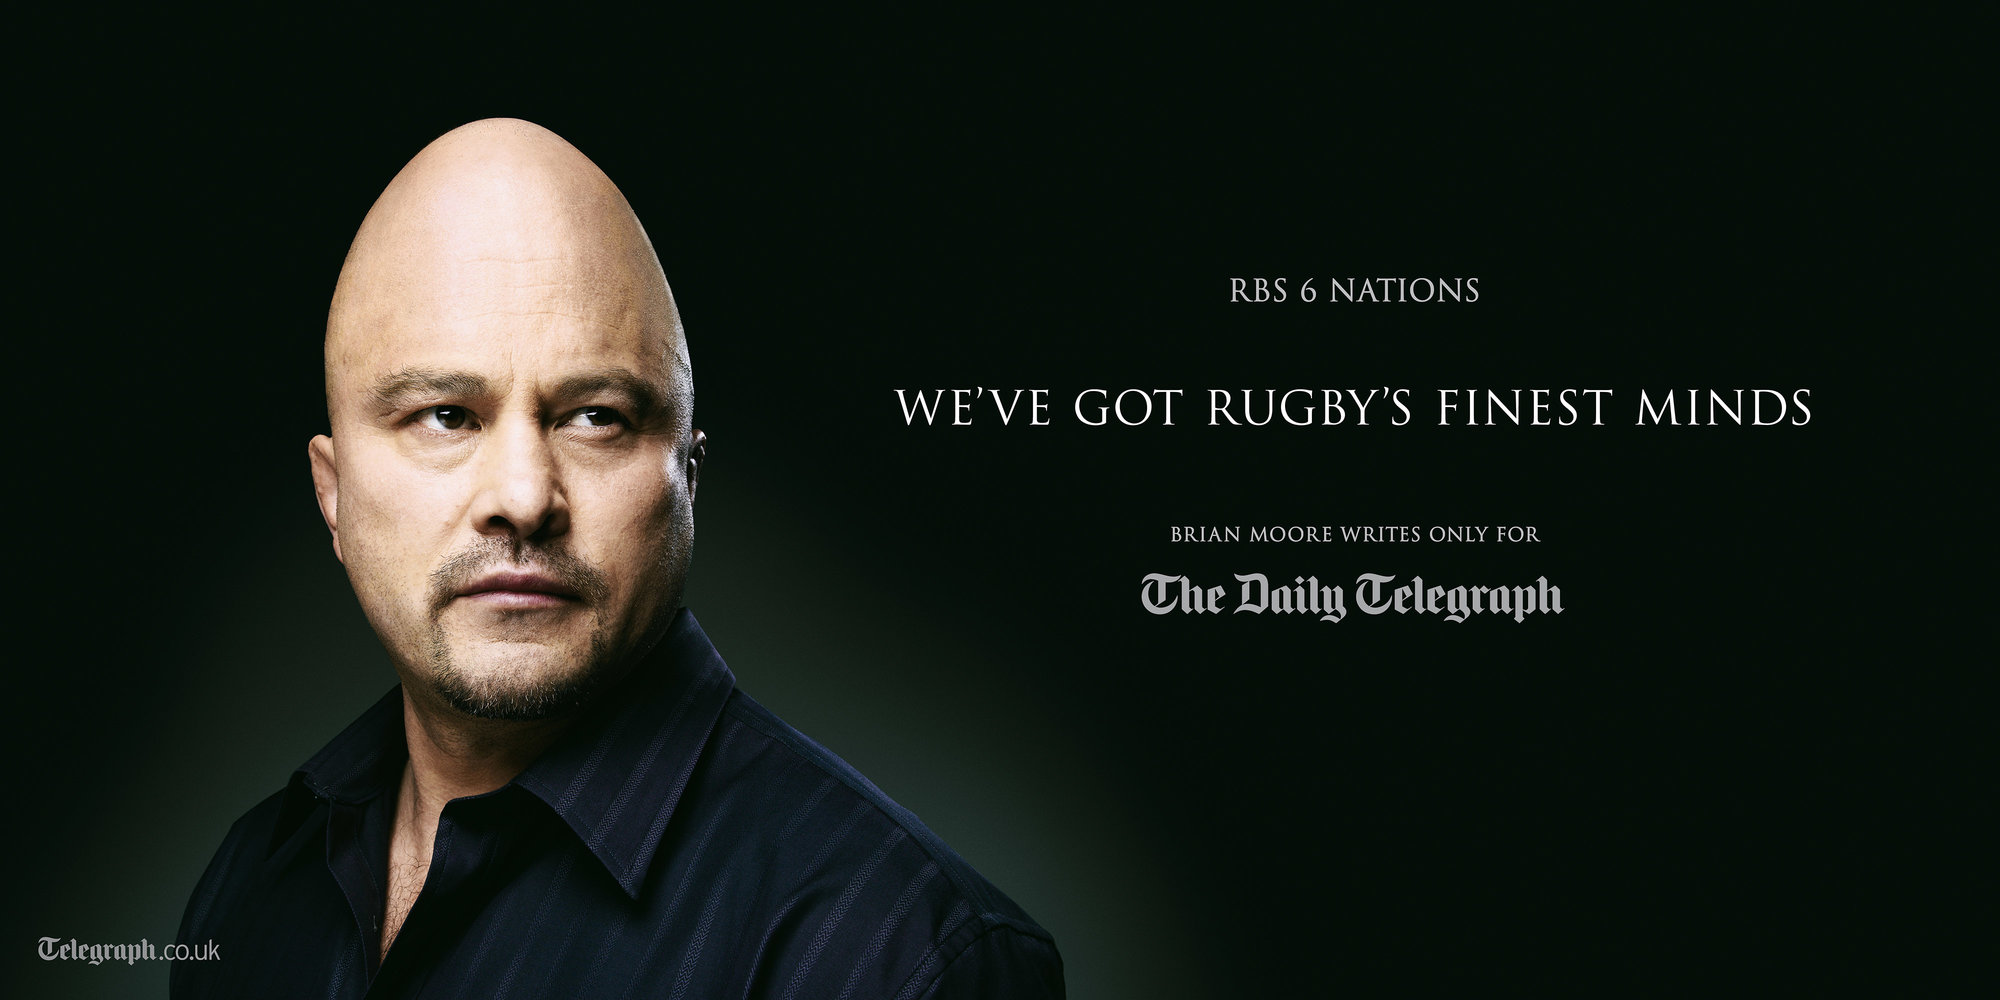 The Daily Telegraph – RBS 6 Nations    